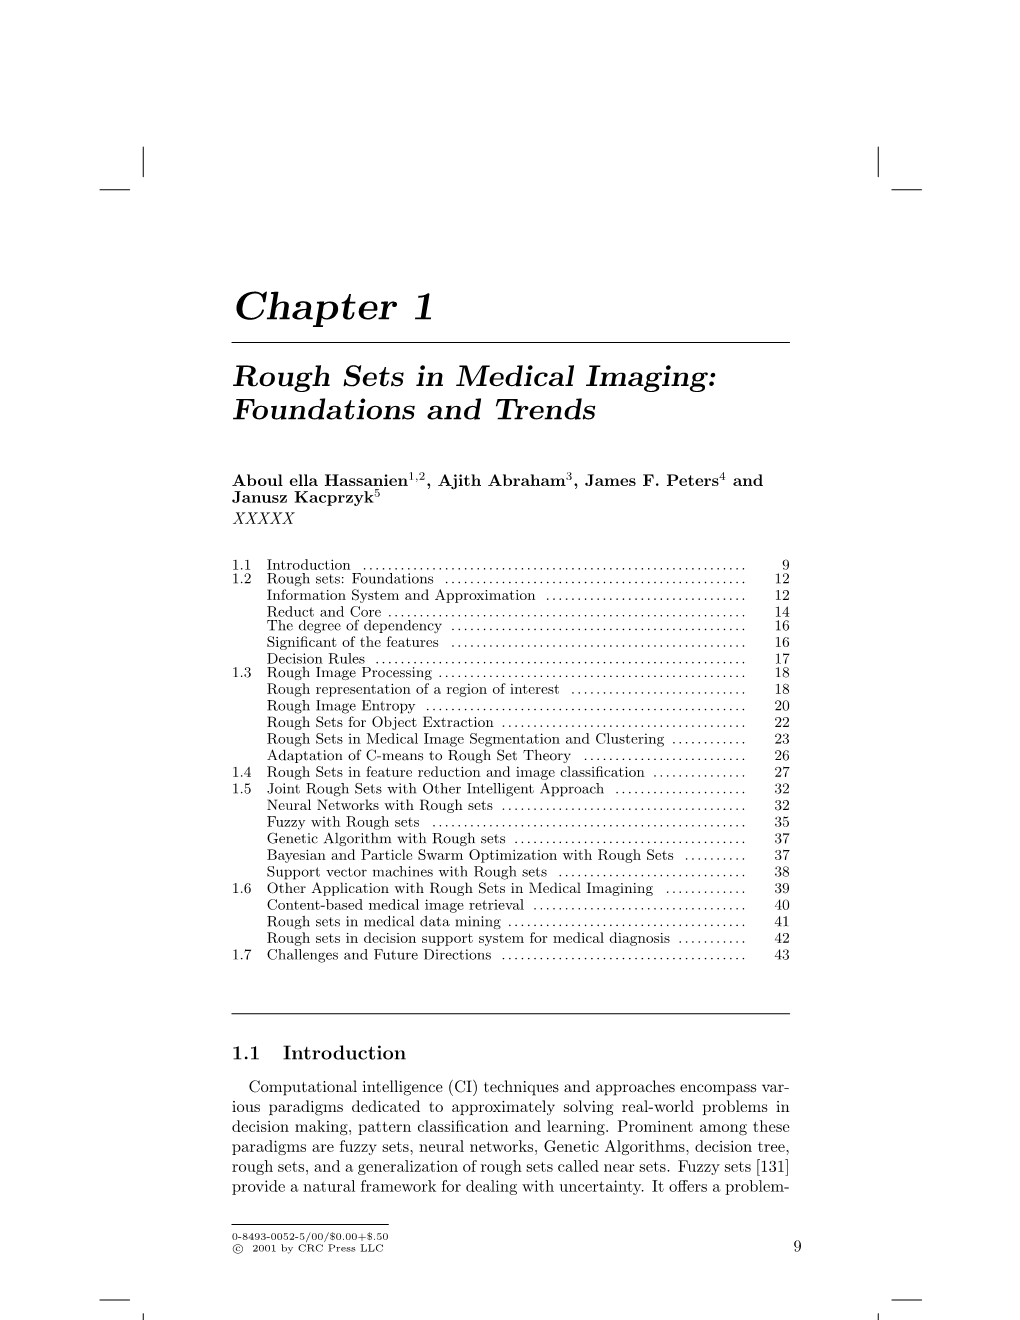 Rough Sets in Medical Imaging: Foundations and Trends